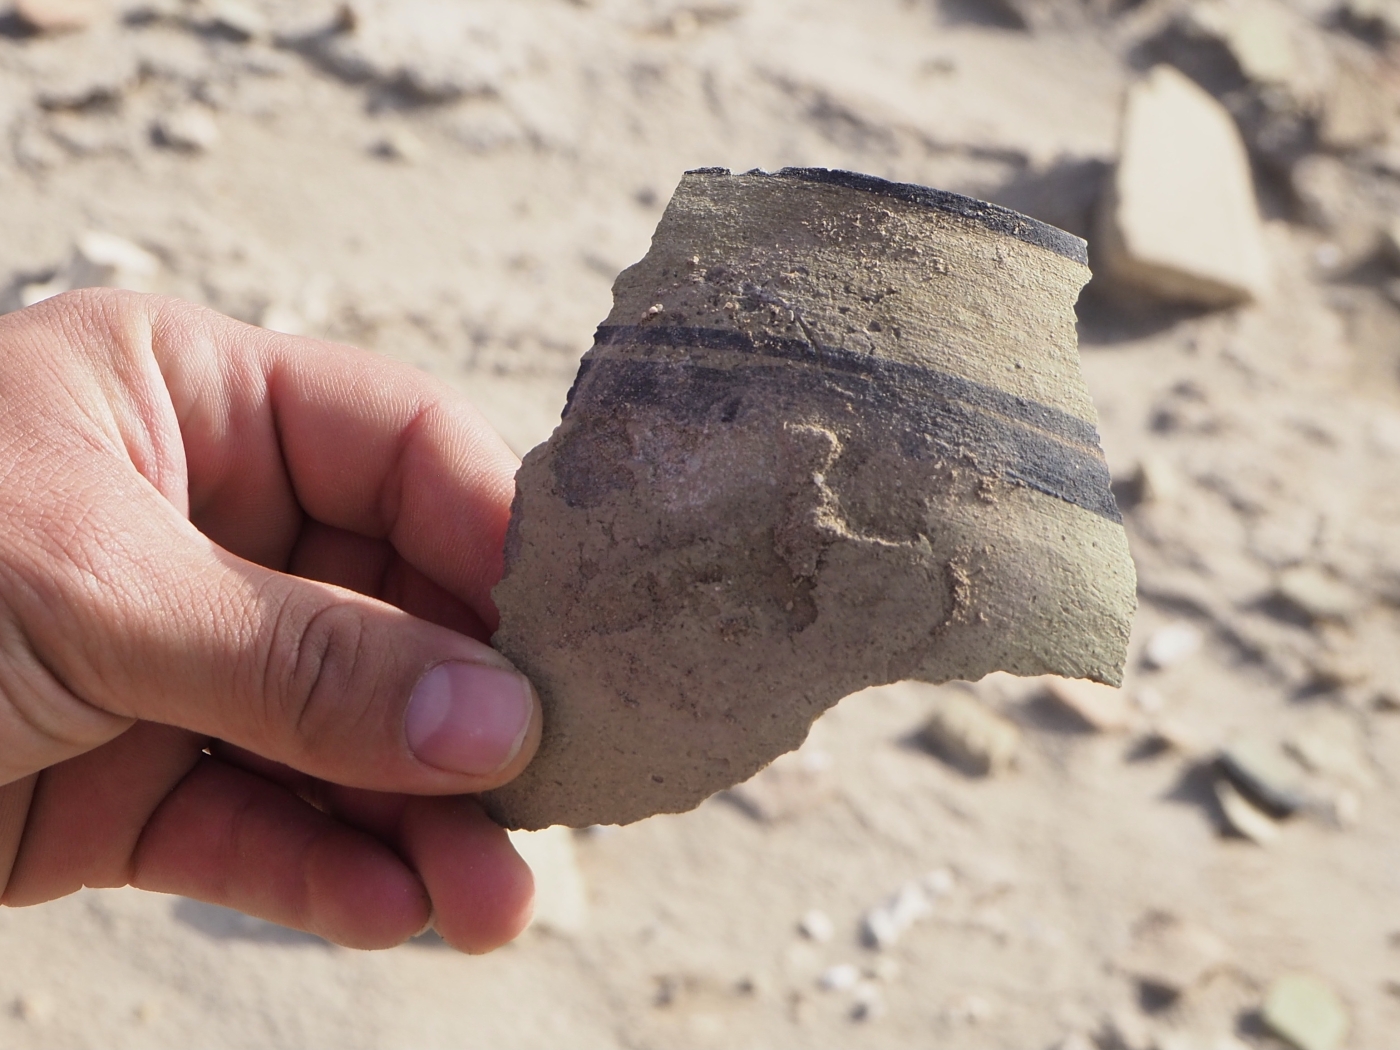 A shard of pottery found on the ground at Eridu, Iraq